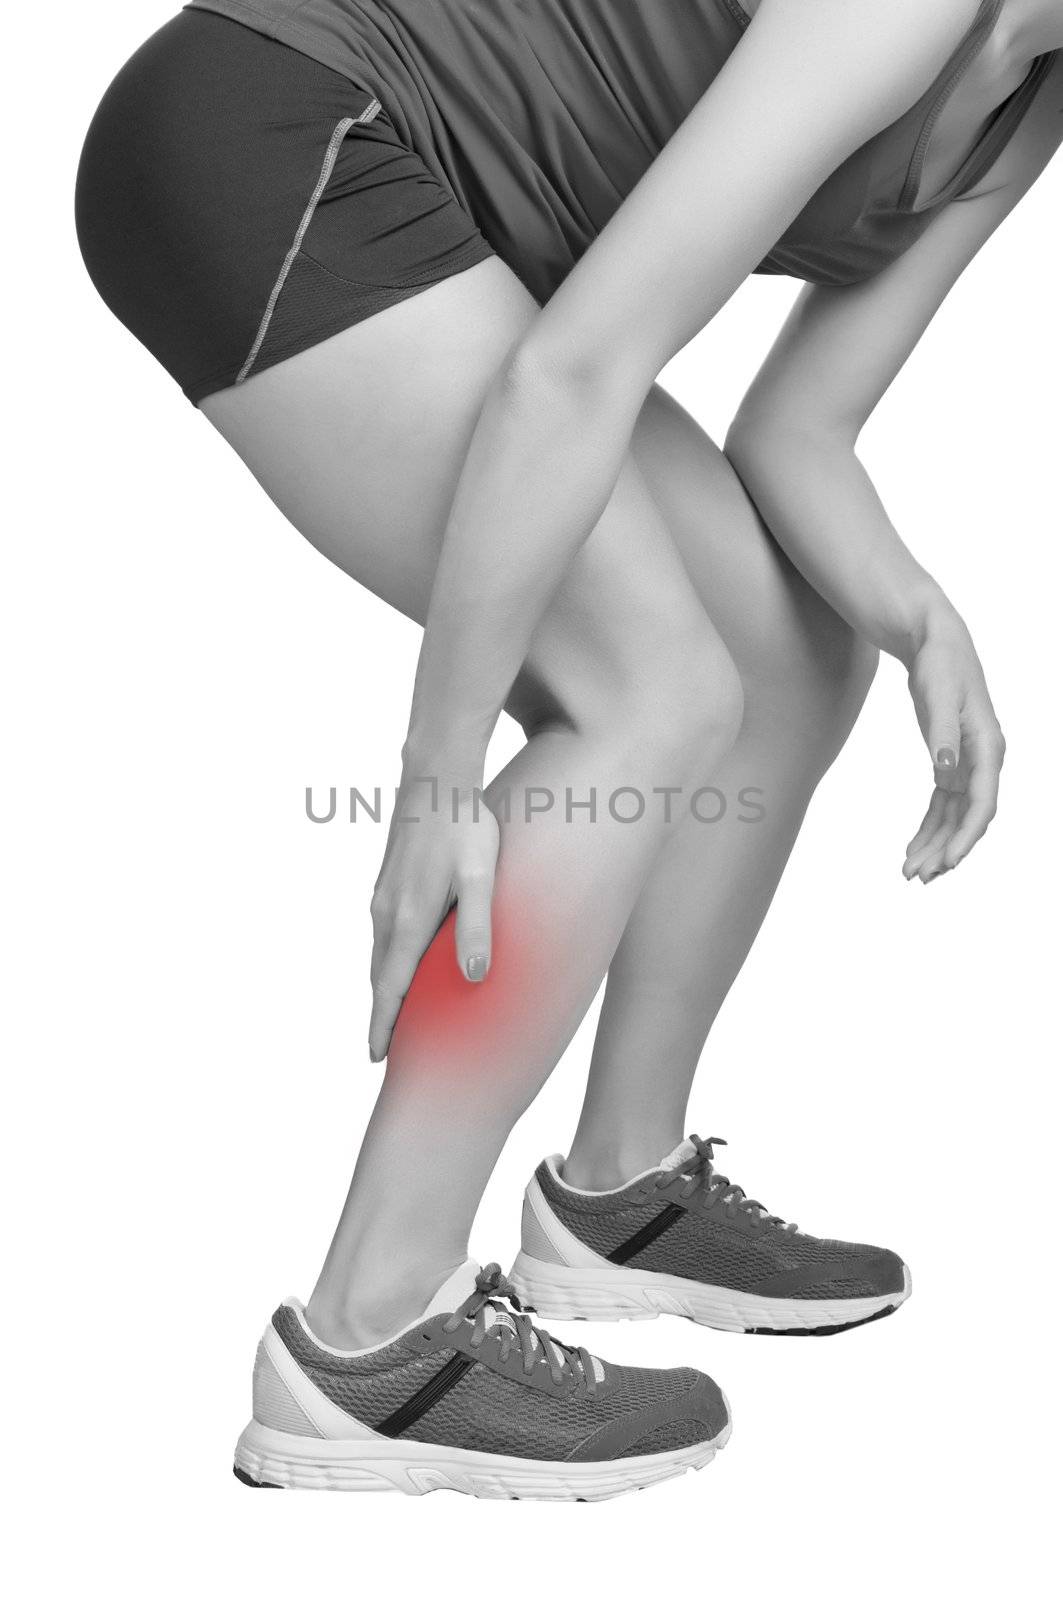 Female jogger with pain in her lower leg, black and white, isolated in white